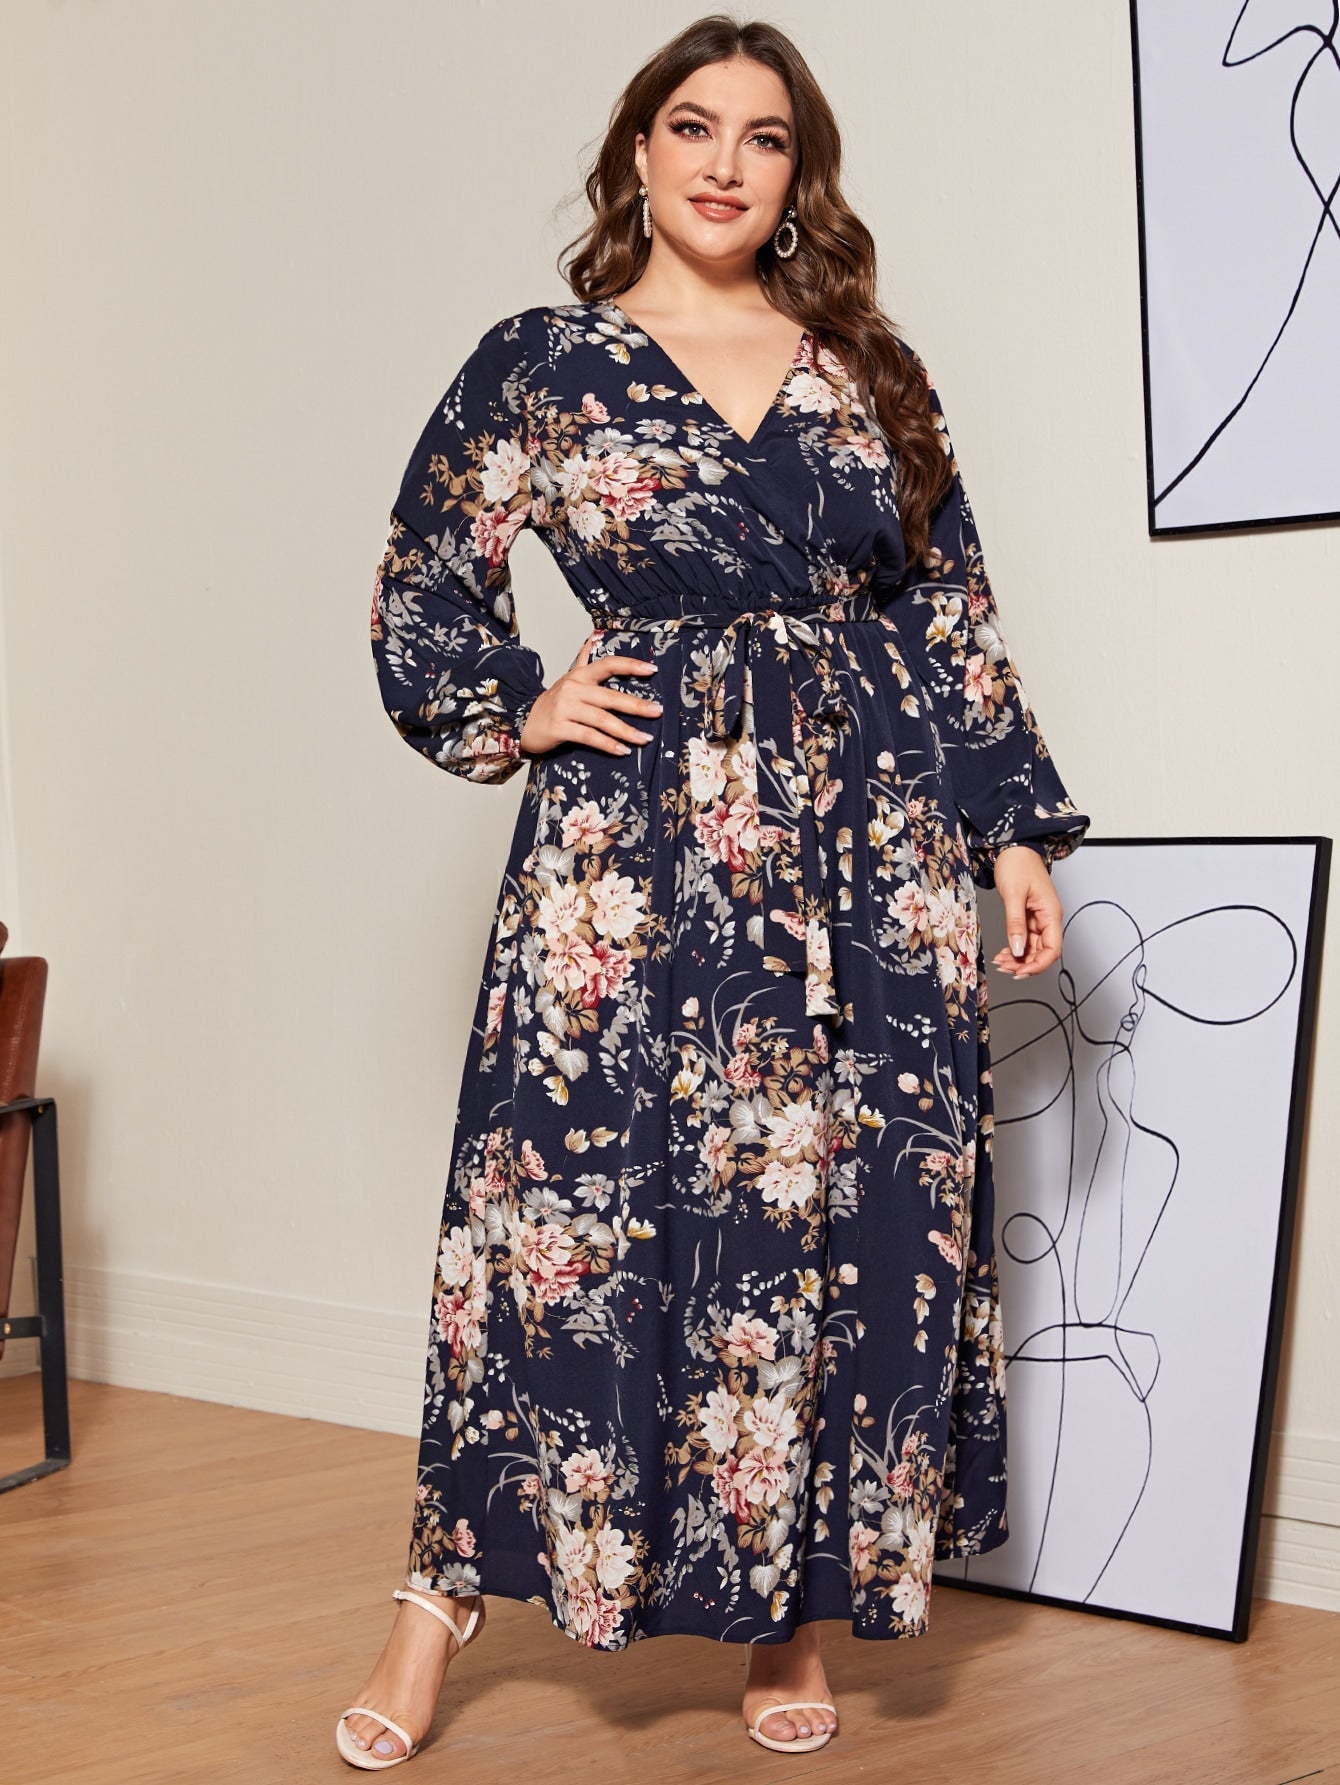 SHEIN Mulvari Plus Floral Print Butterfly Sleeve Belted Maxi Dress